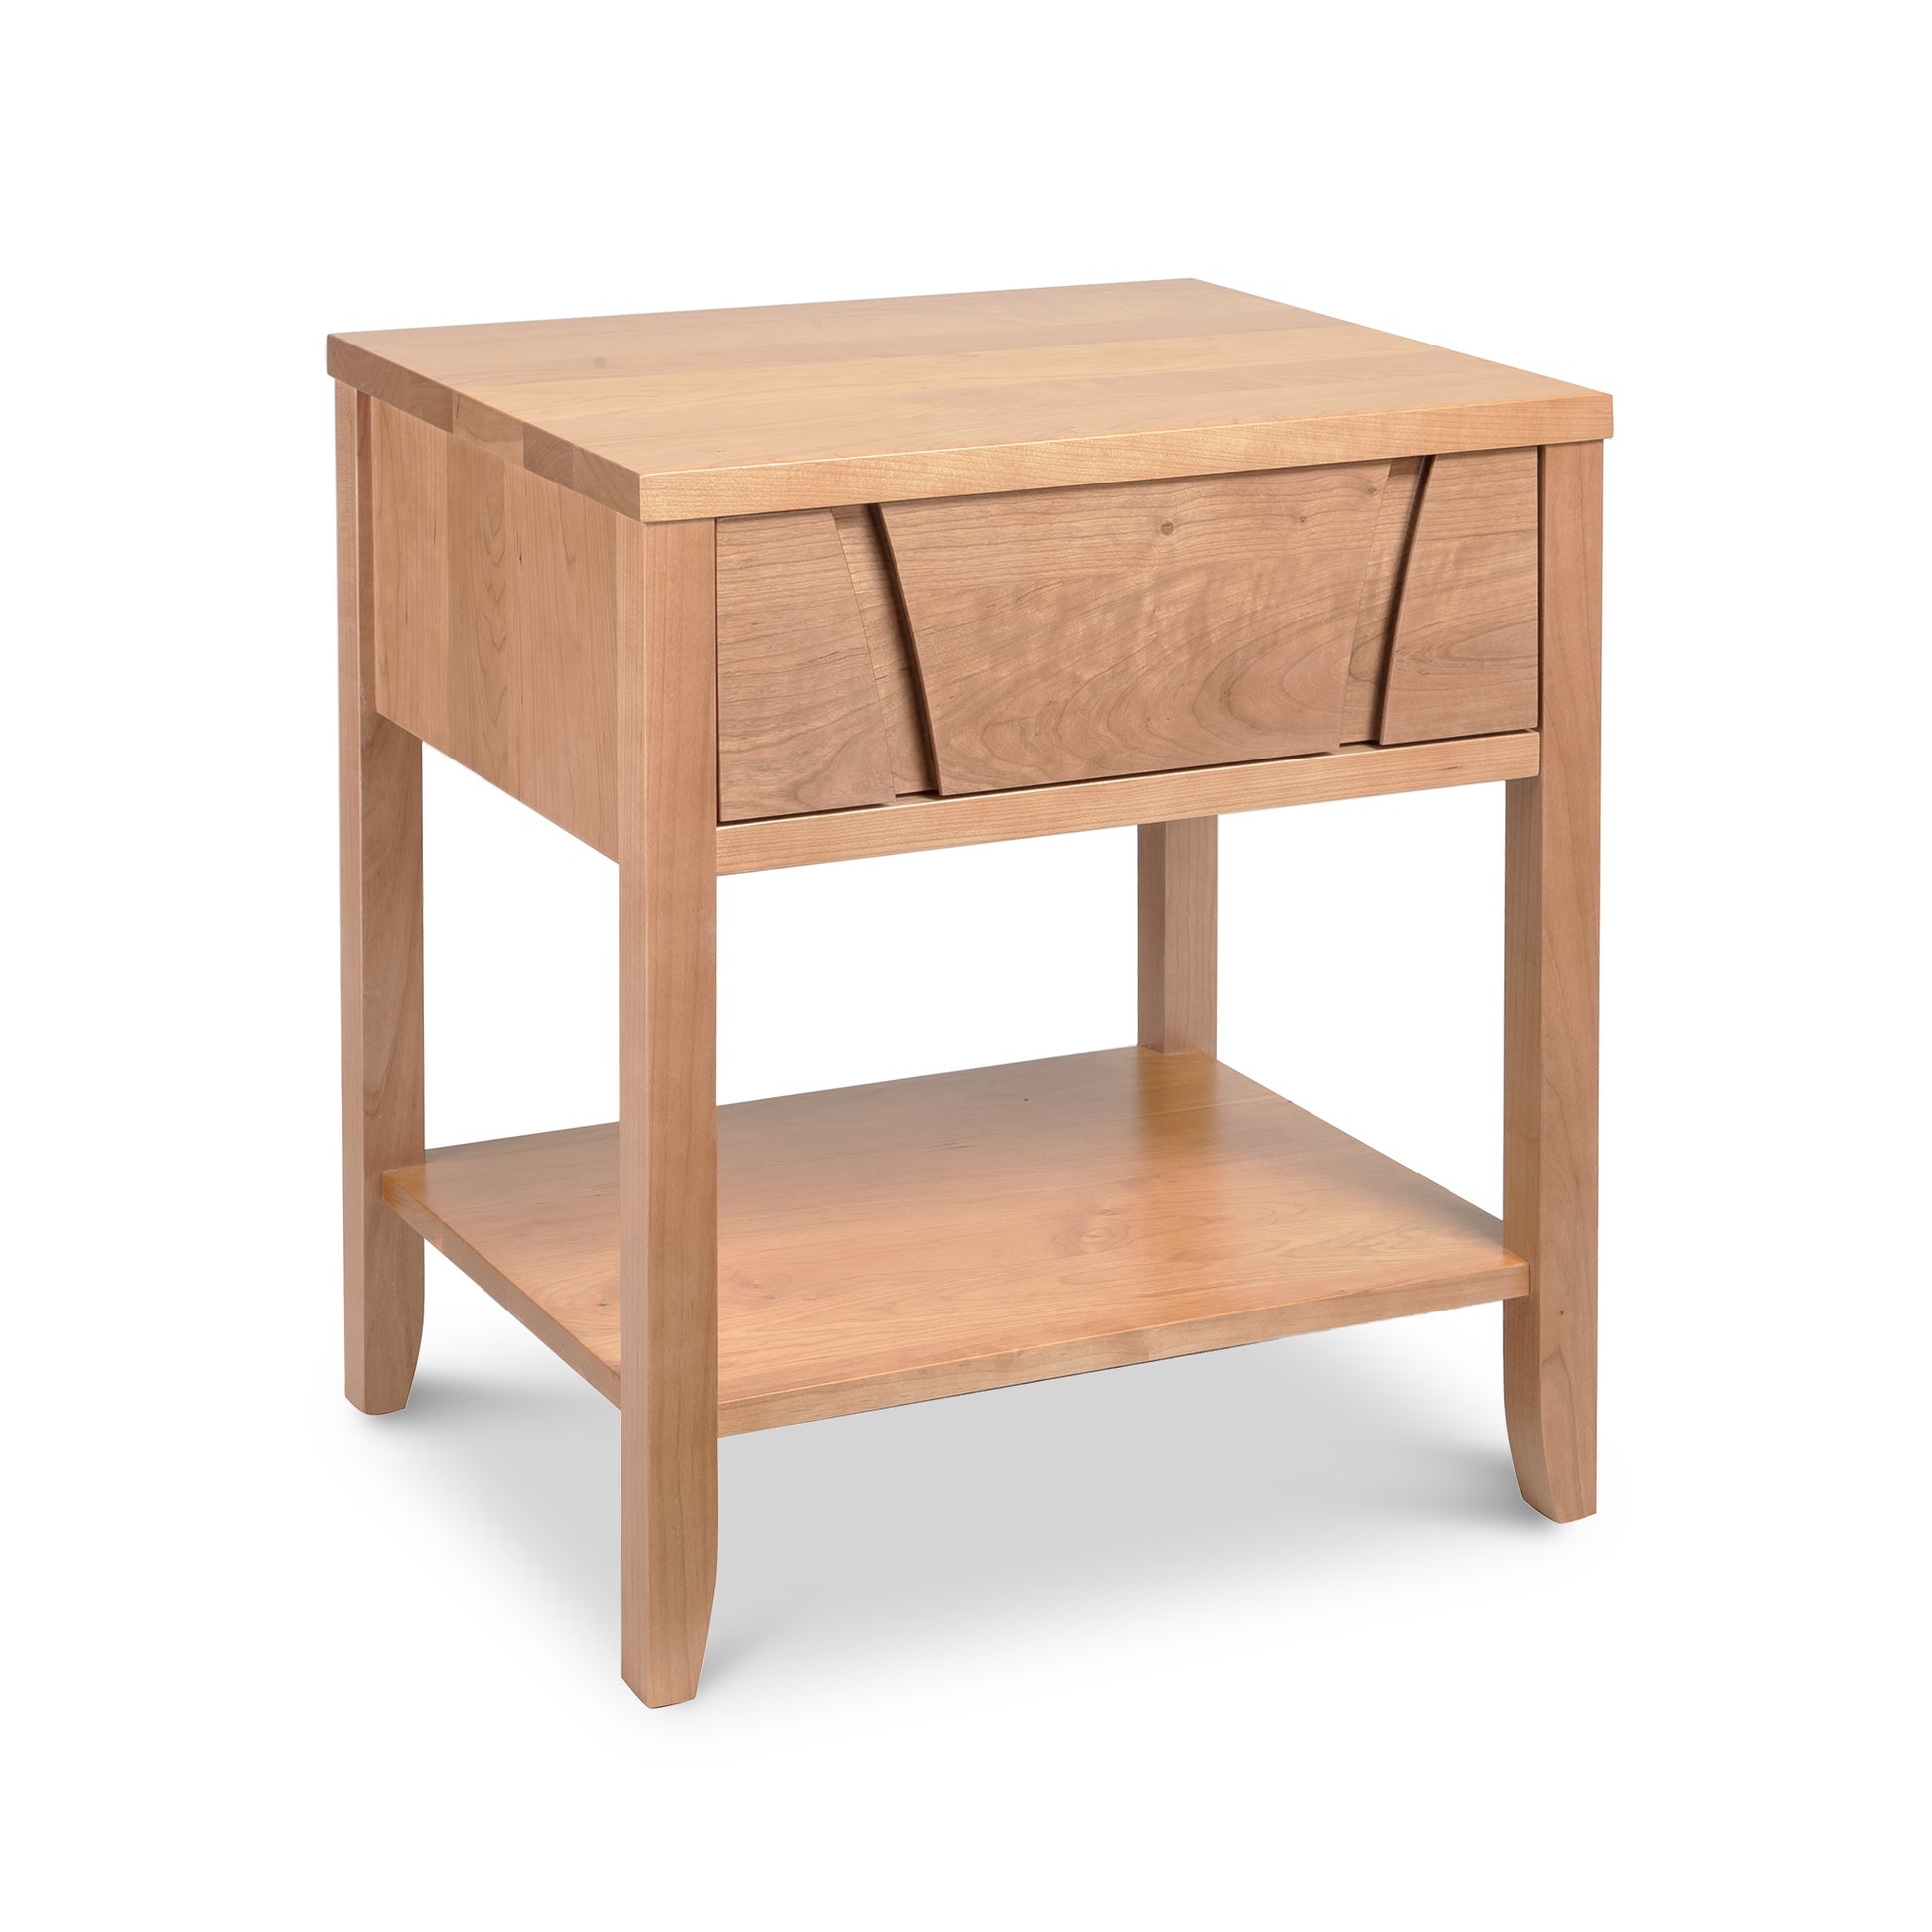 A Lyndon Furniture Holland 1-Drawer Open Shelf Nightstand with a drawer and an open shelf for storage.